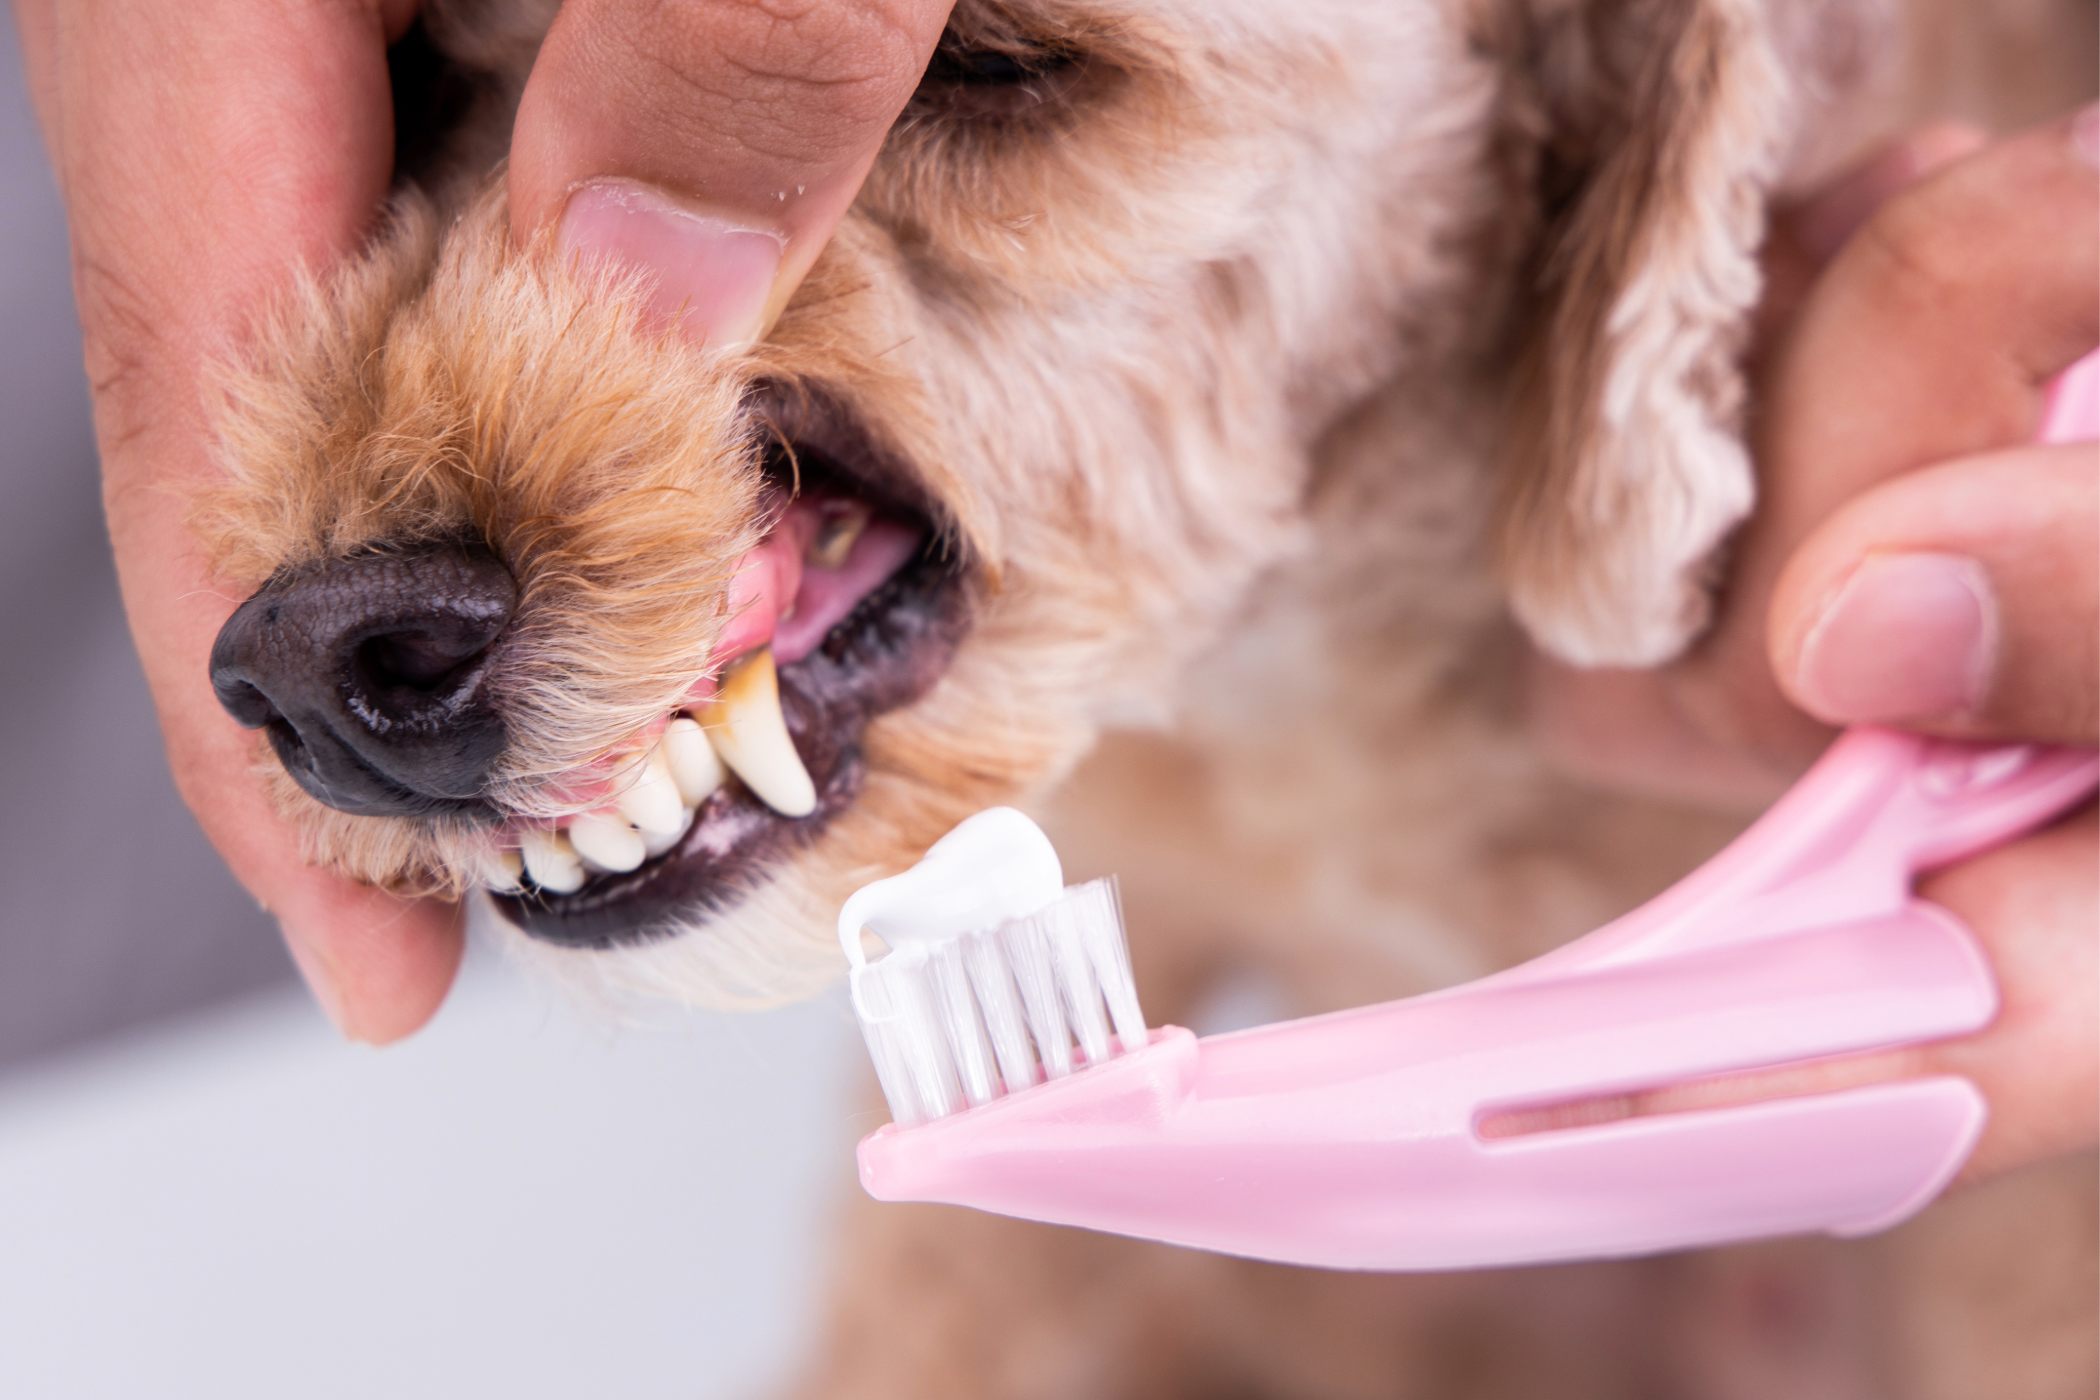 A person brushing their dog's teeth.